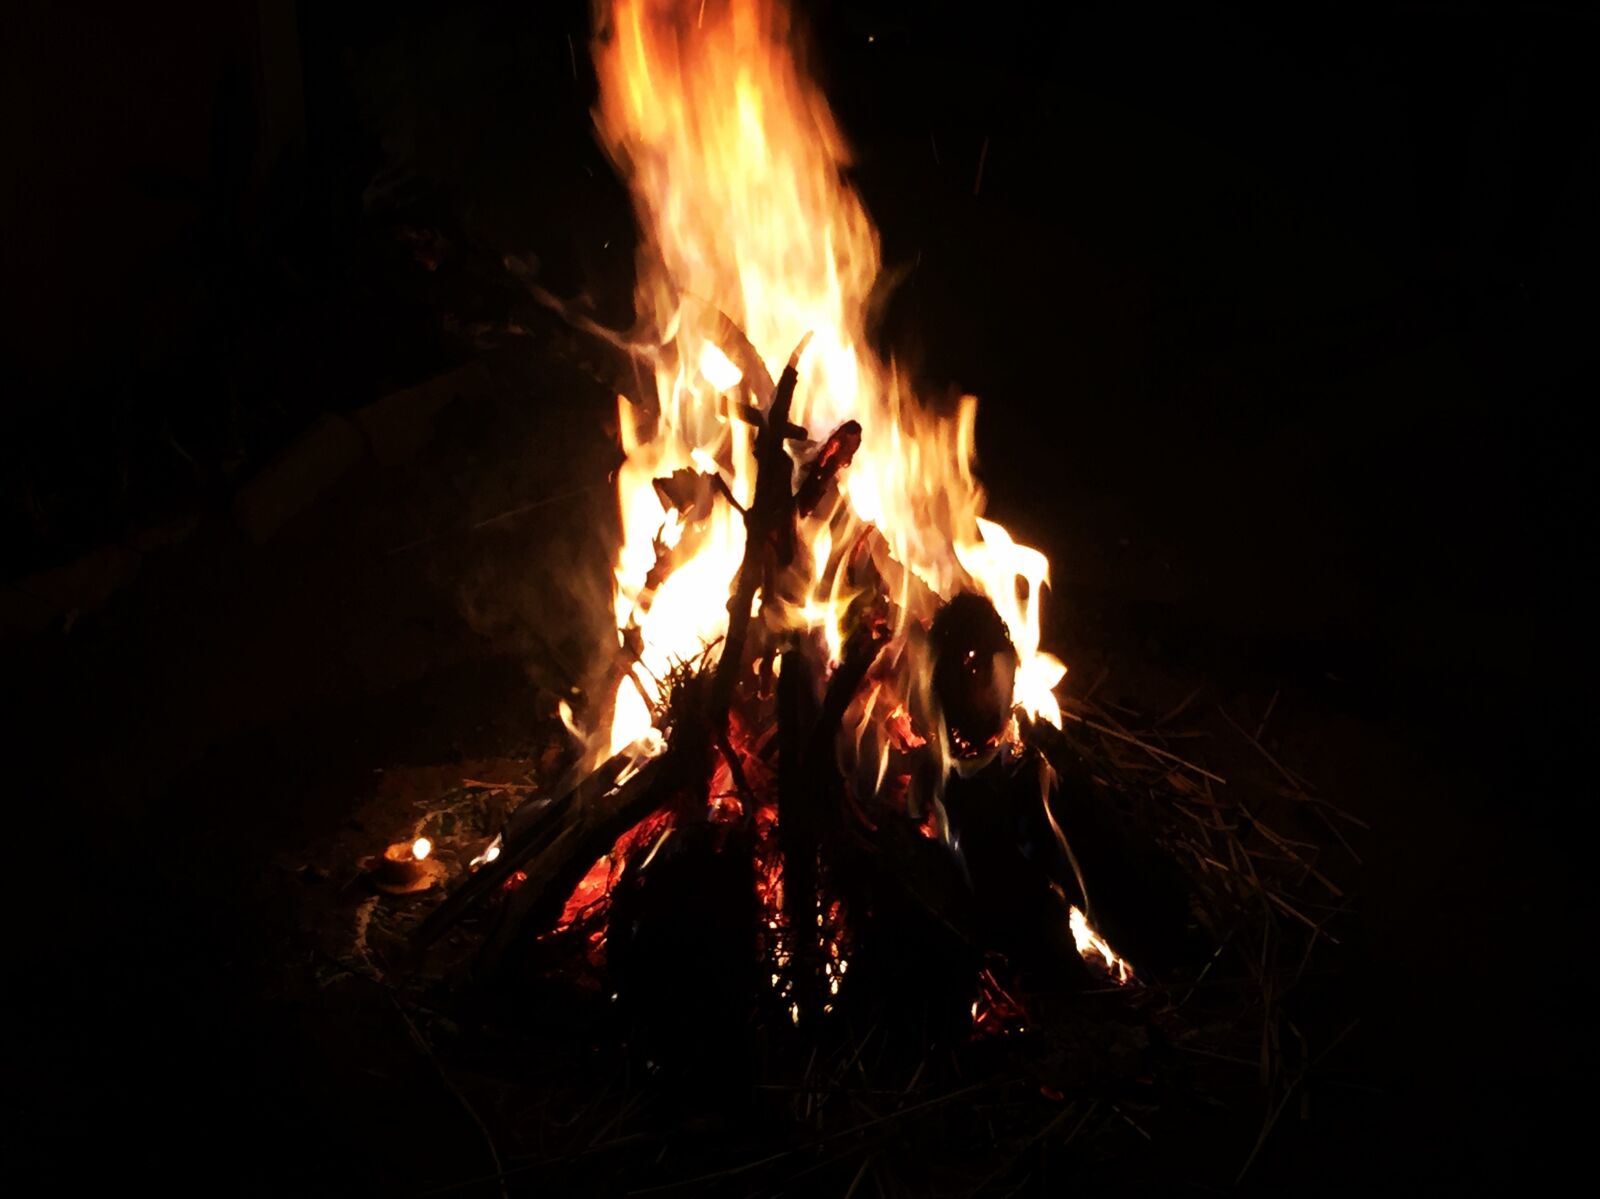 Apple iPhone 6 sample photo. Fire, camp, evening photography